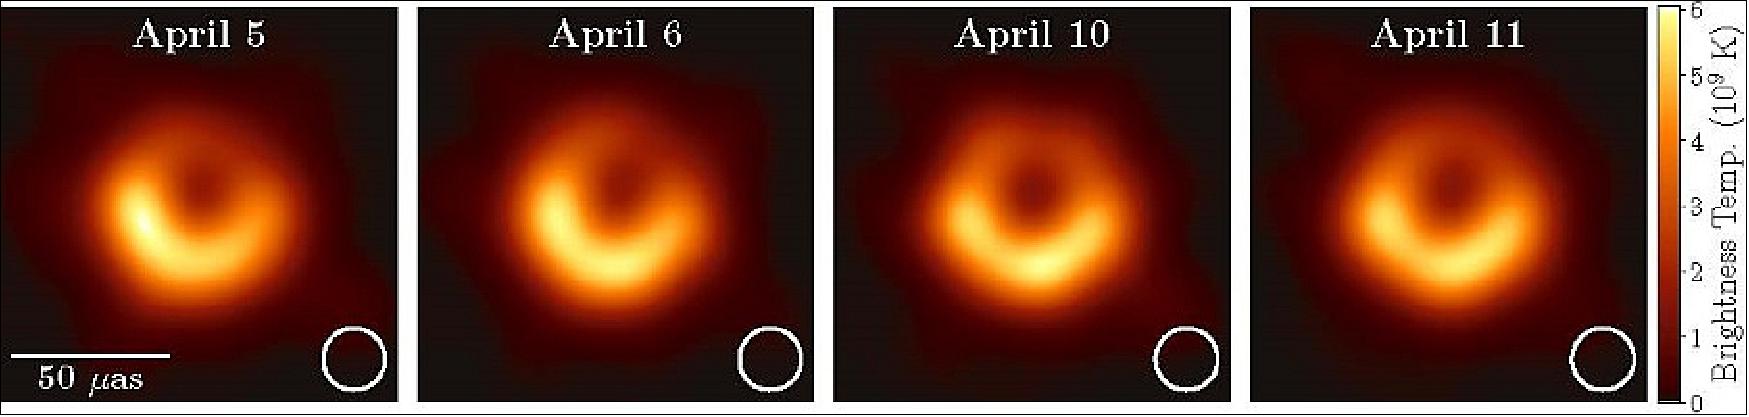 Figure 2: EHT images of M87 on four different observing nights. In each panel, the white circle shows the resolution of the EHT. All four images are dominated by a bright ring with enhanced emission in the south (image credit: Shep Doeleman & EHT Collaboration)